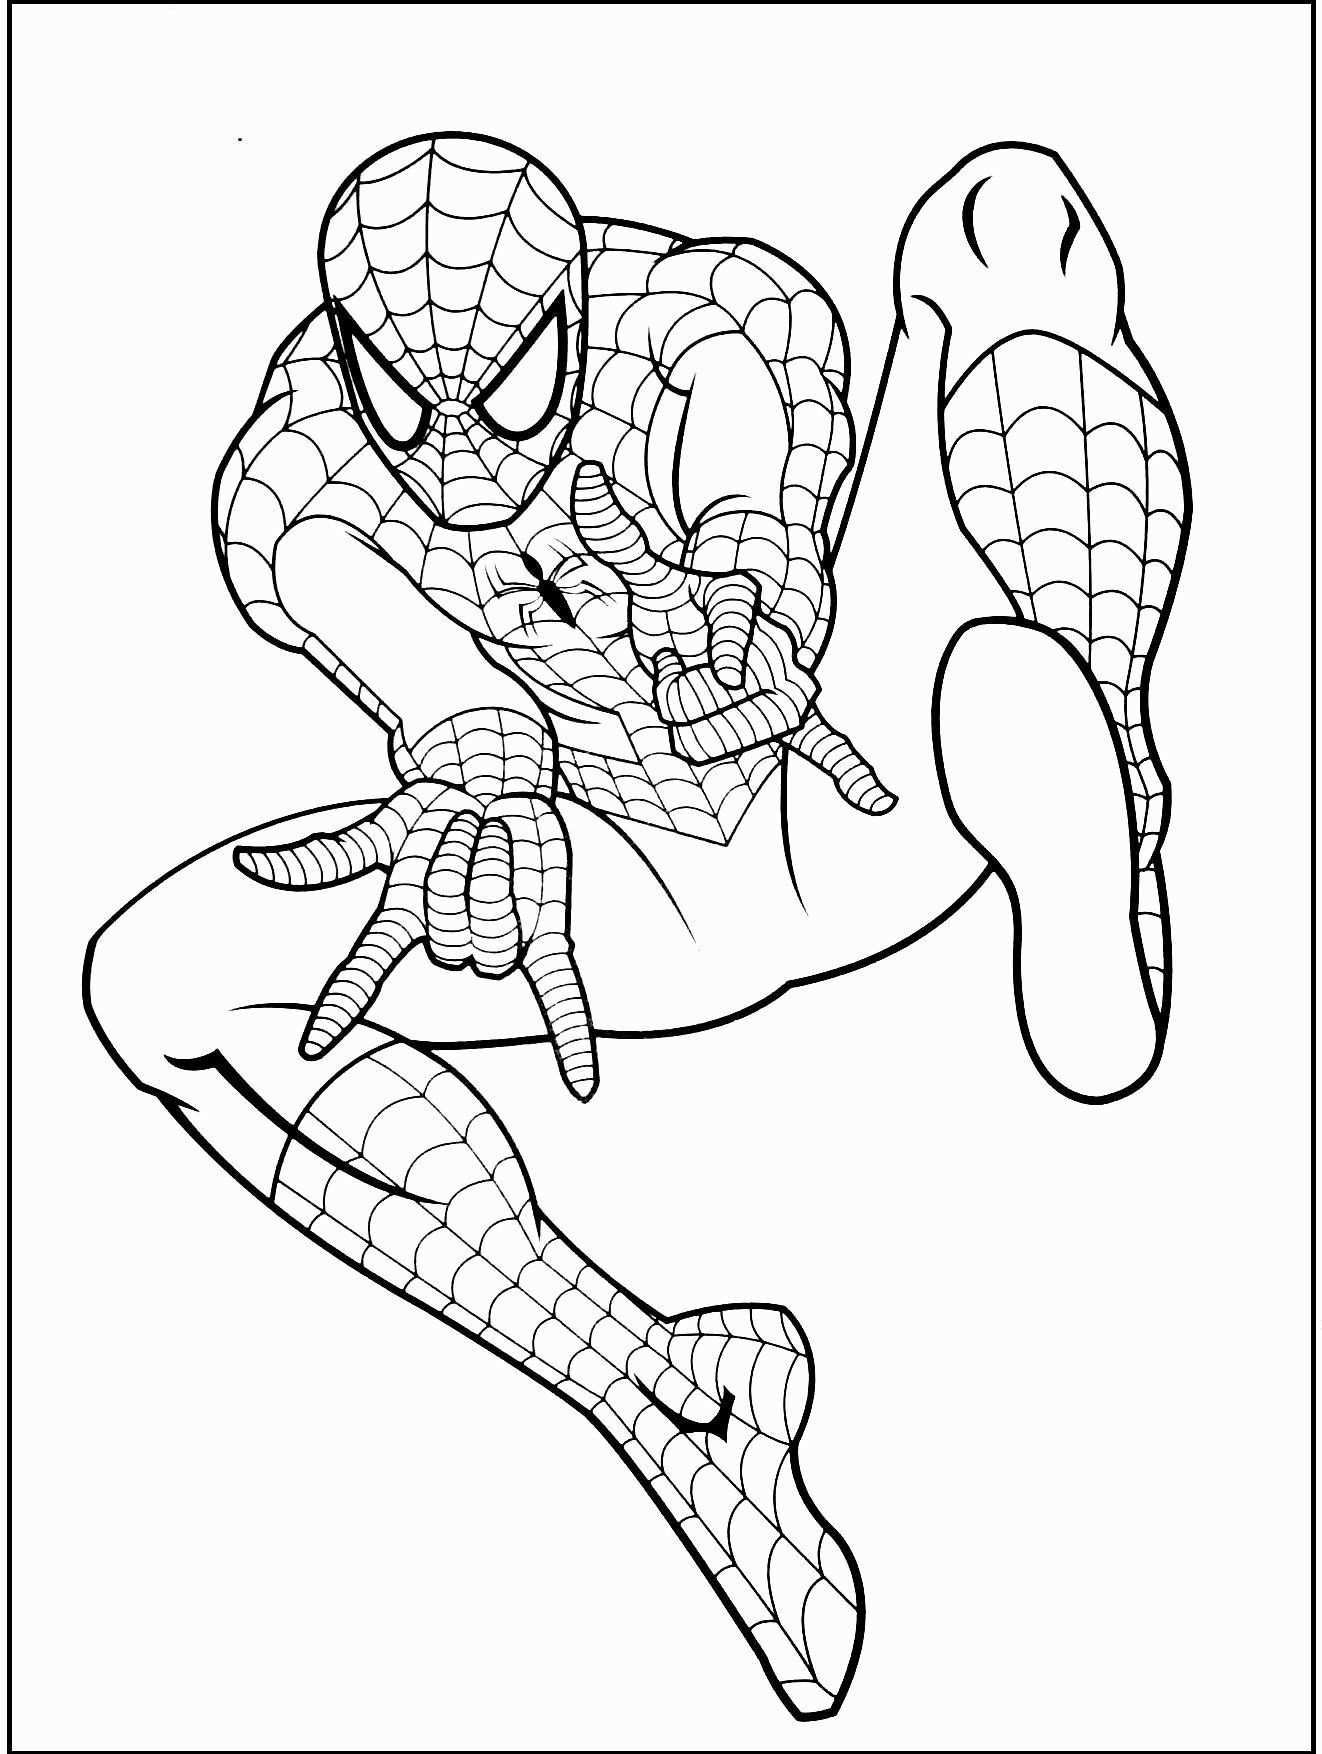 Spiderman Coloring Pages Printable Fresh Spiderman Gratuit Coloring Picture For Kids